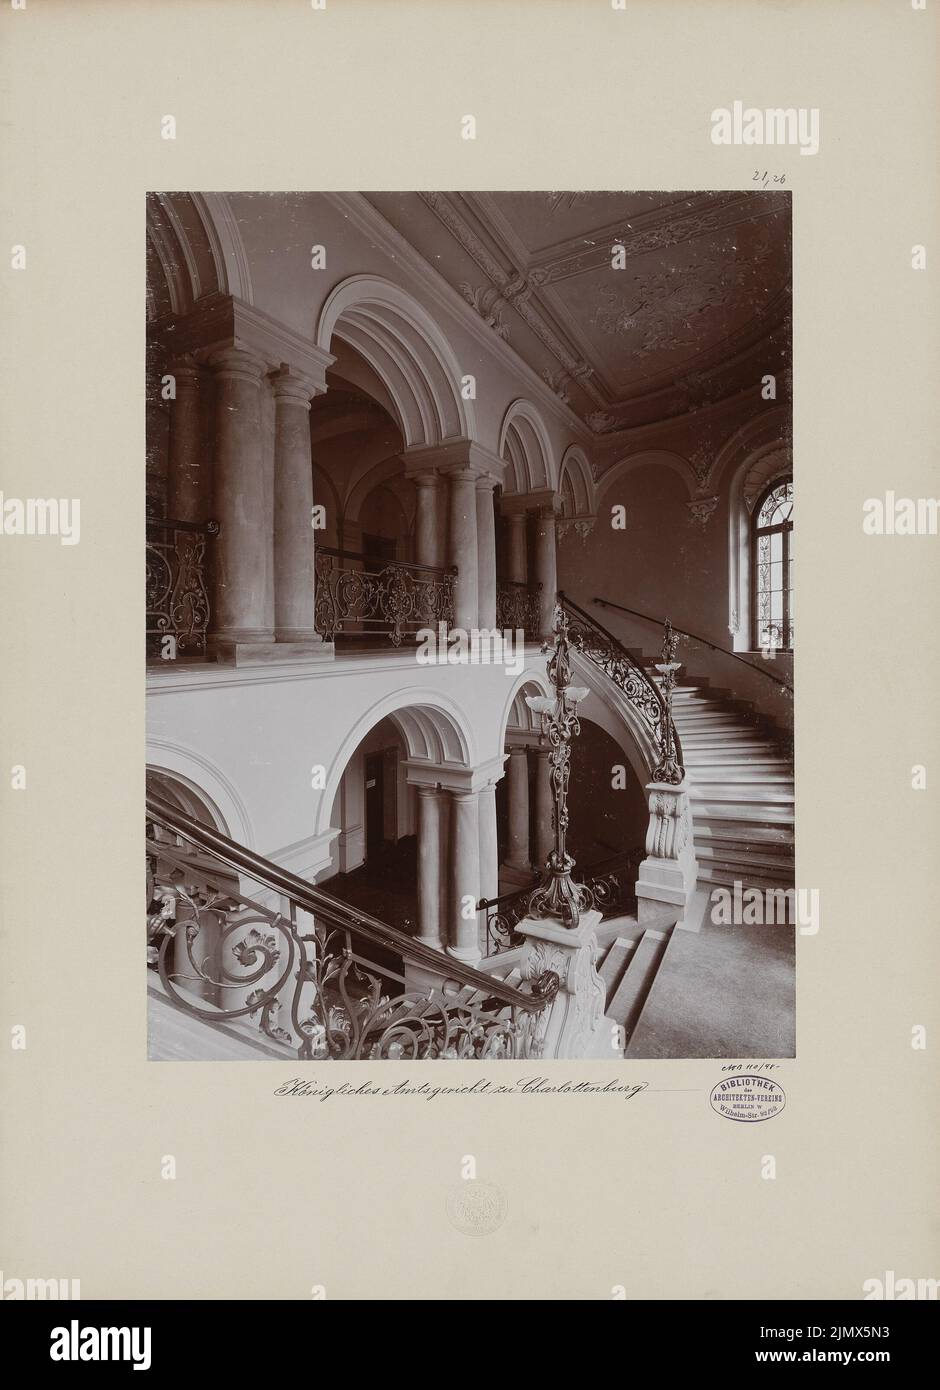 Poetsch Otto (1848-1915), District Court Berlin-Charlottenburg. Civil departments (1895-1897): Interior view staircase. Photo on cardboard, 58.8 x 42.5 cm (including scan edges) Poetsch Otto  (1848-1915): Amtsgericht, Berlin-Charlottenburg. Zivilabteilungen Stock Photo